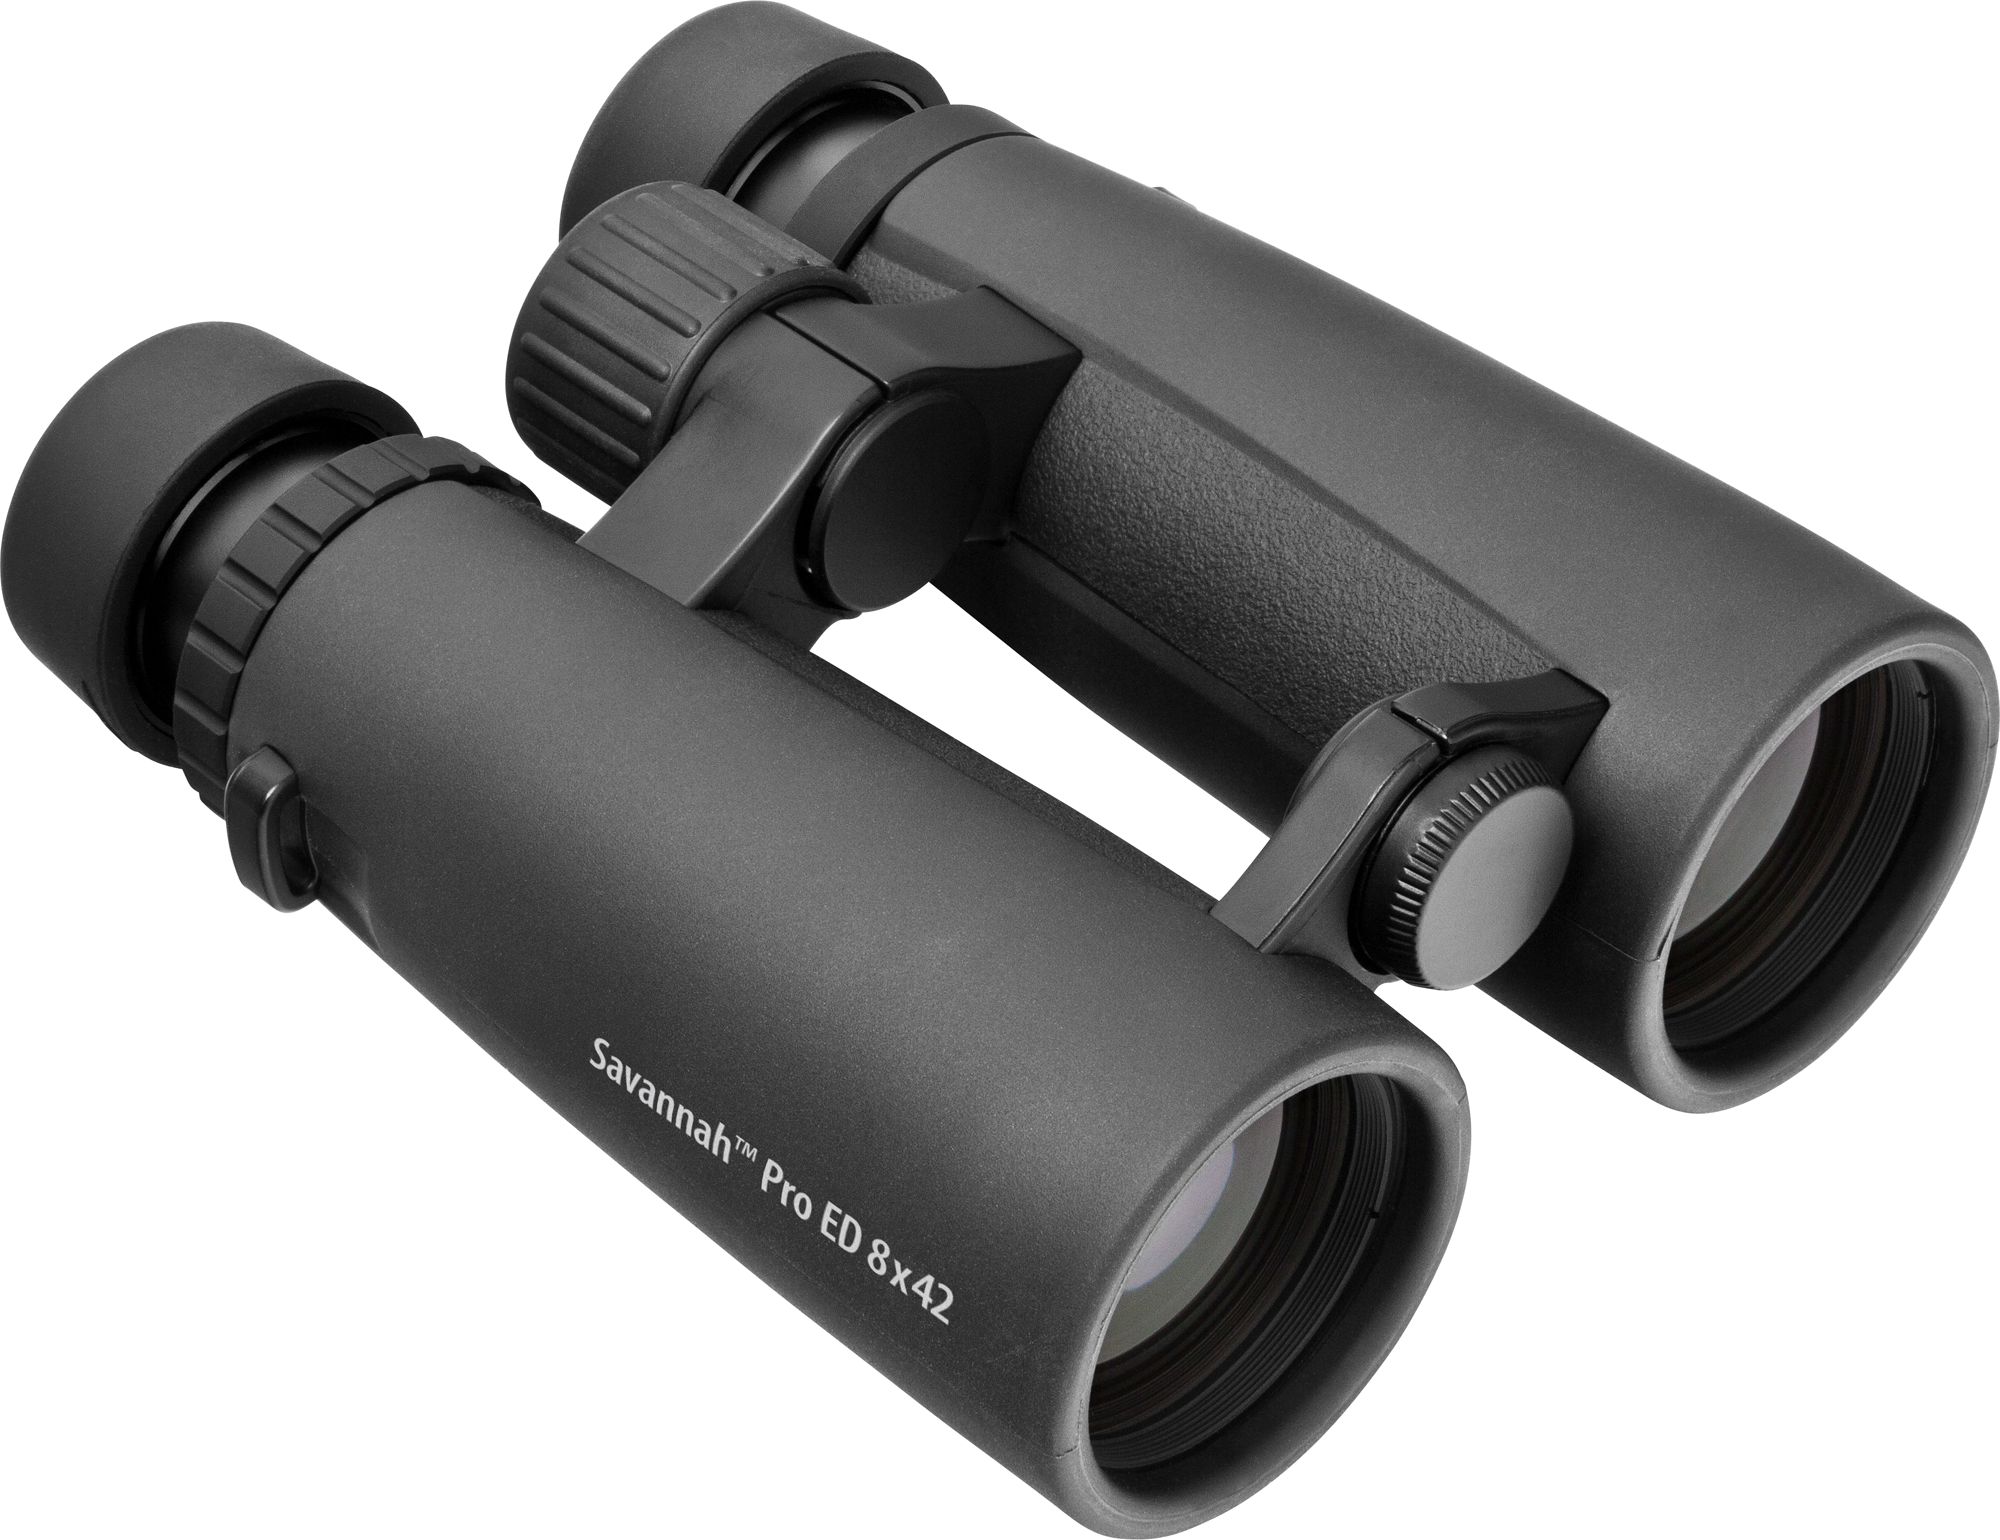 Orion's Savannah Pro ED 8x42 are a great choice for birders and wildlife enthusiasts.